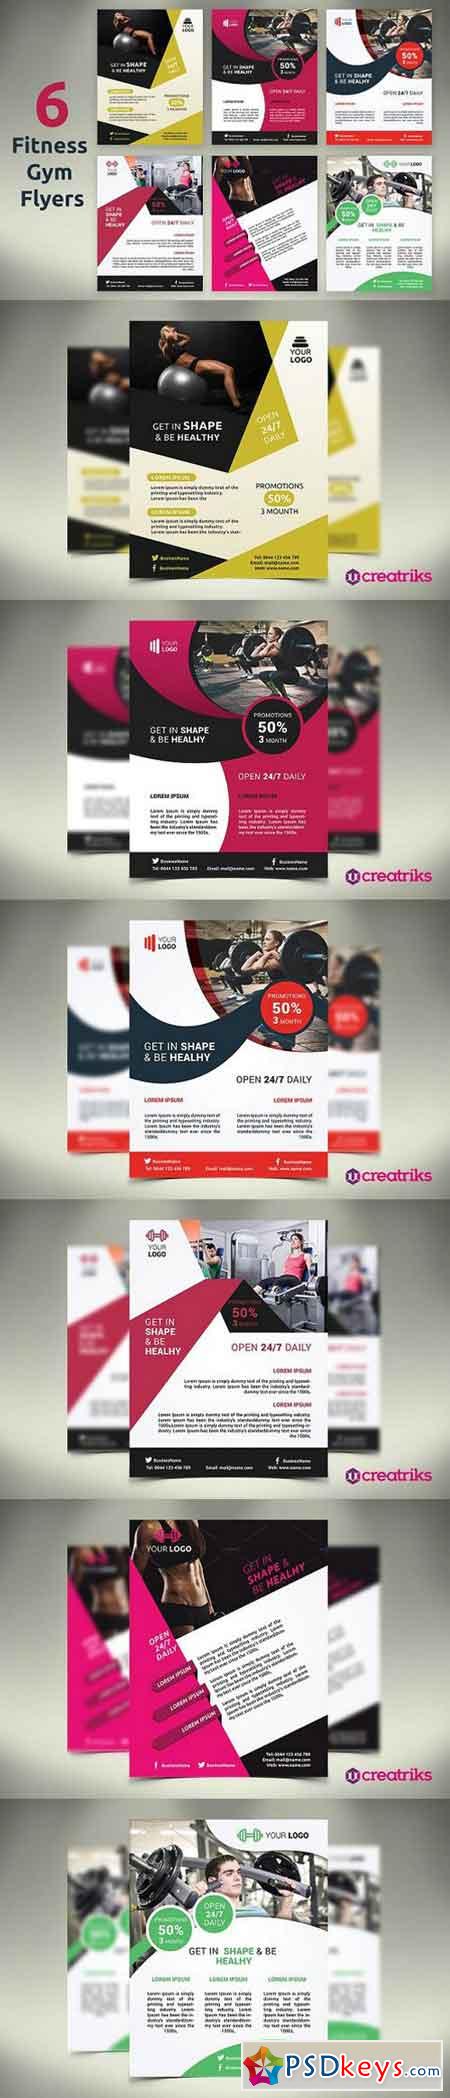 6 Fitness Gym Flyers 1423126